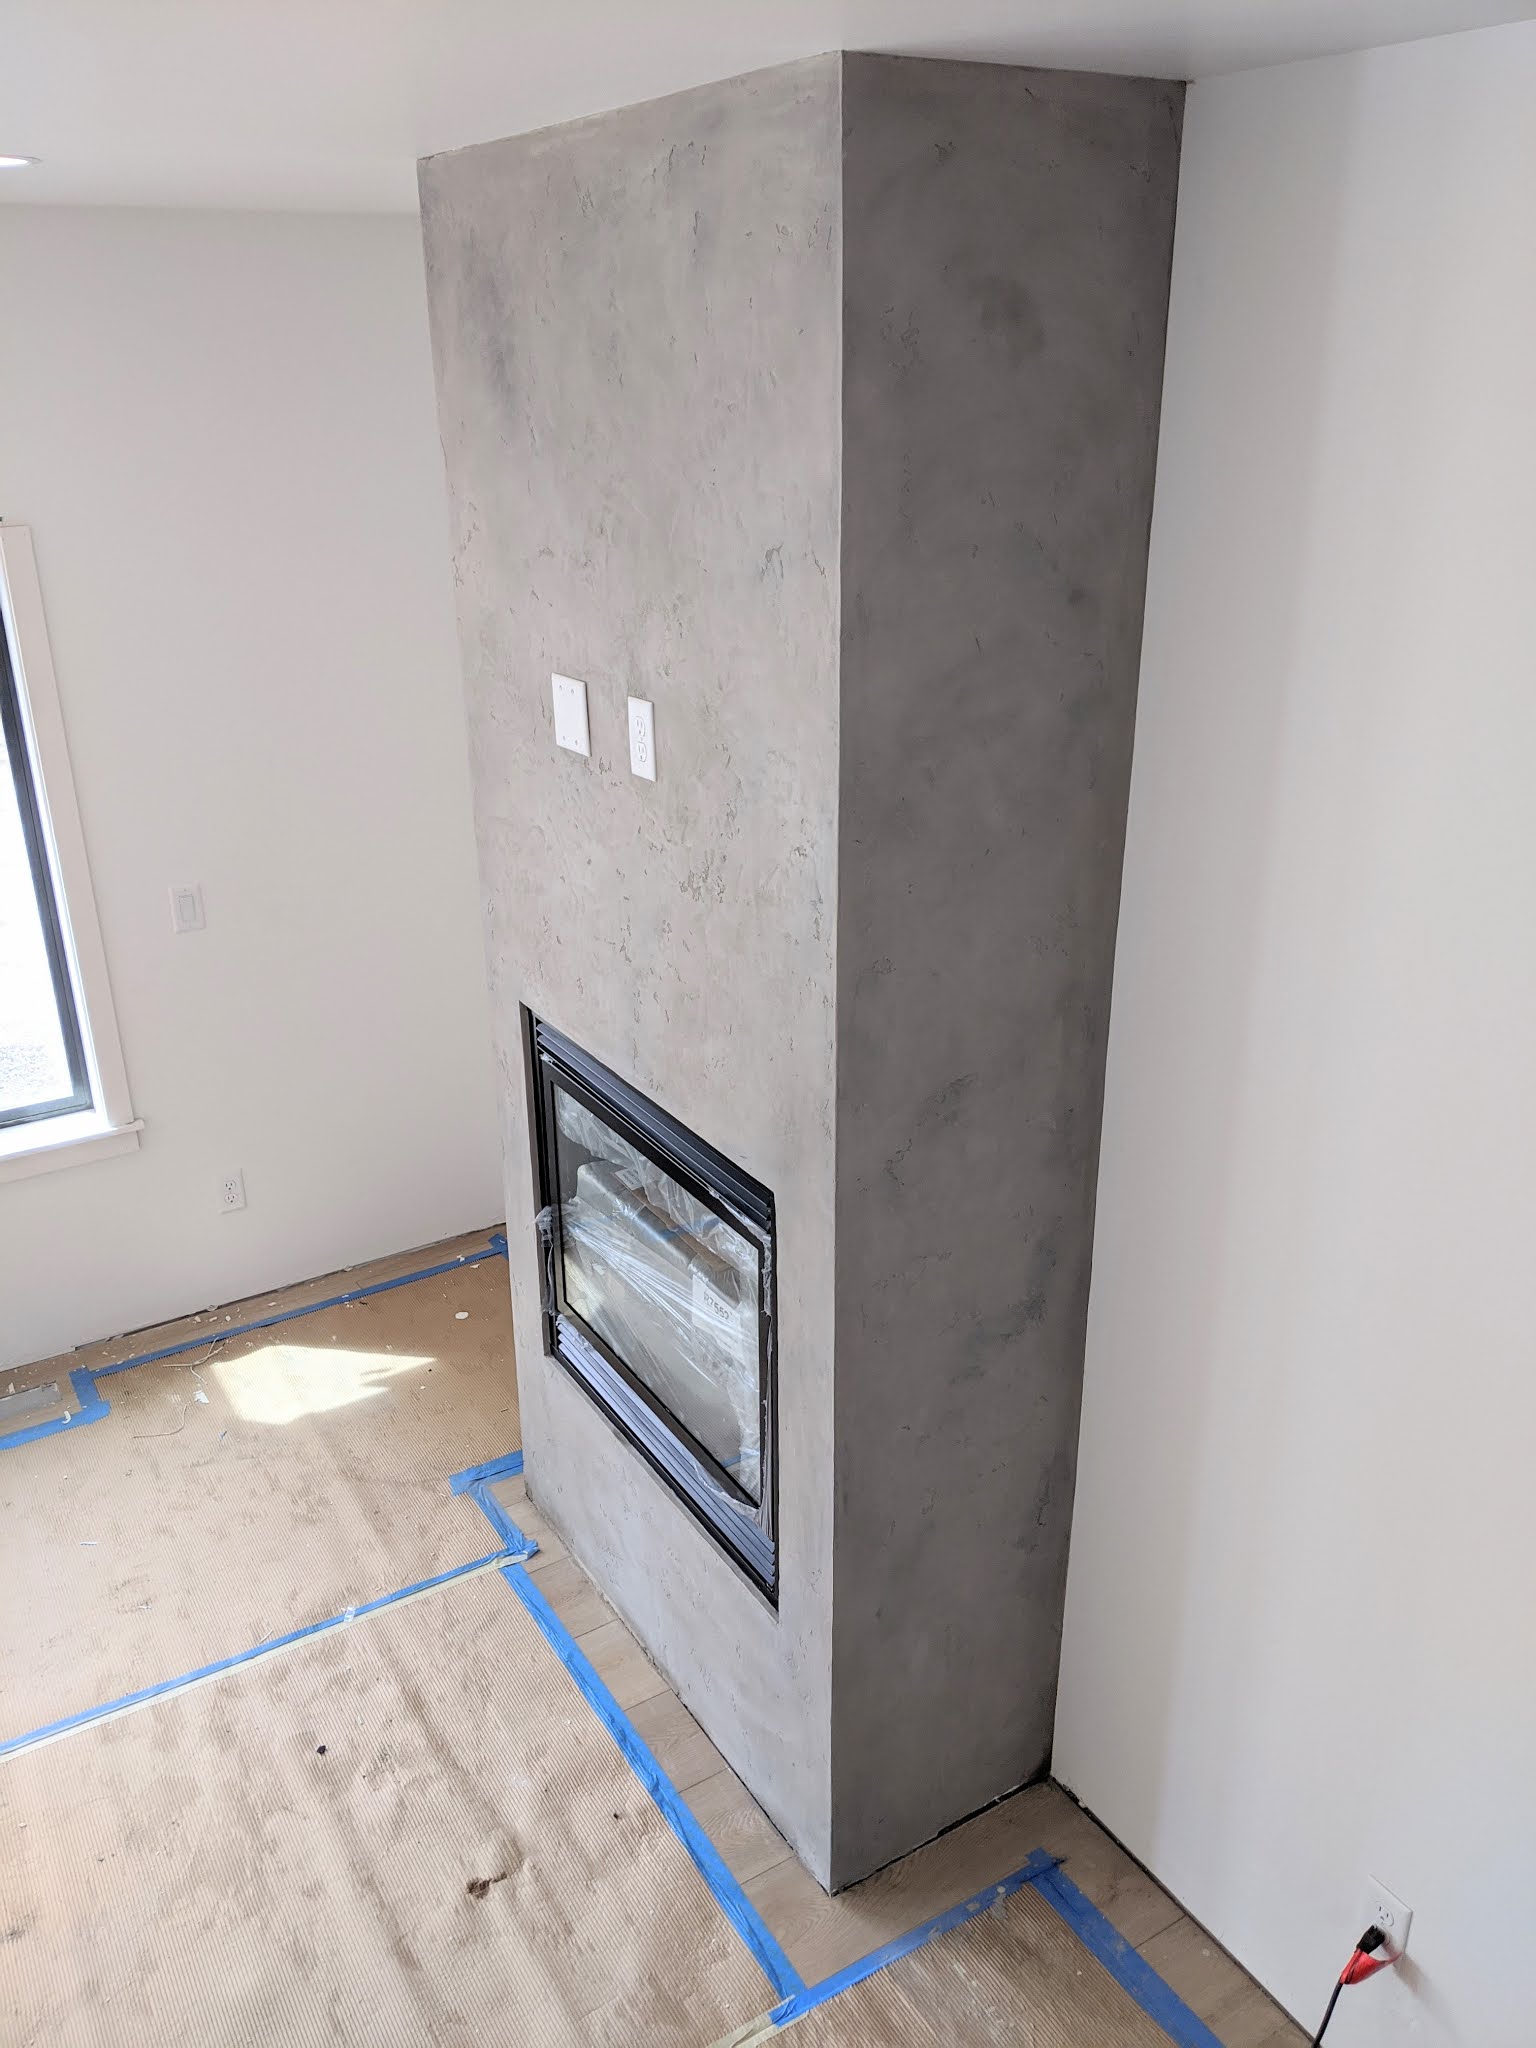 Concrete Trend For Fireplace Surrounds